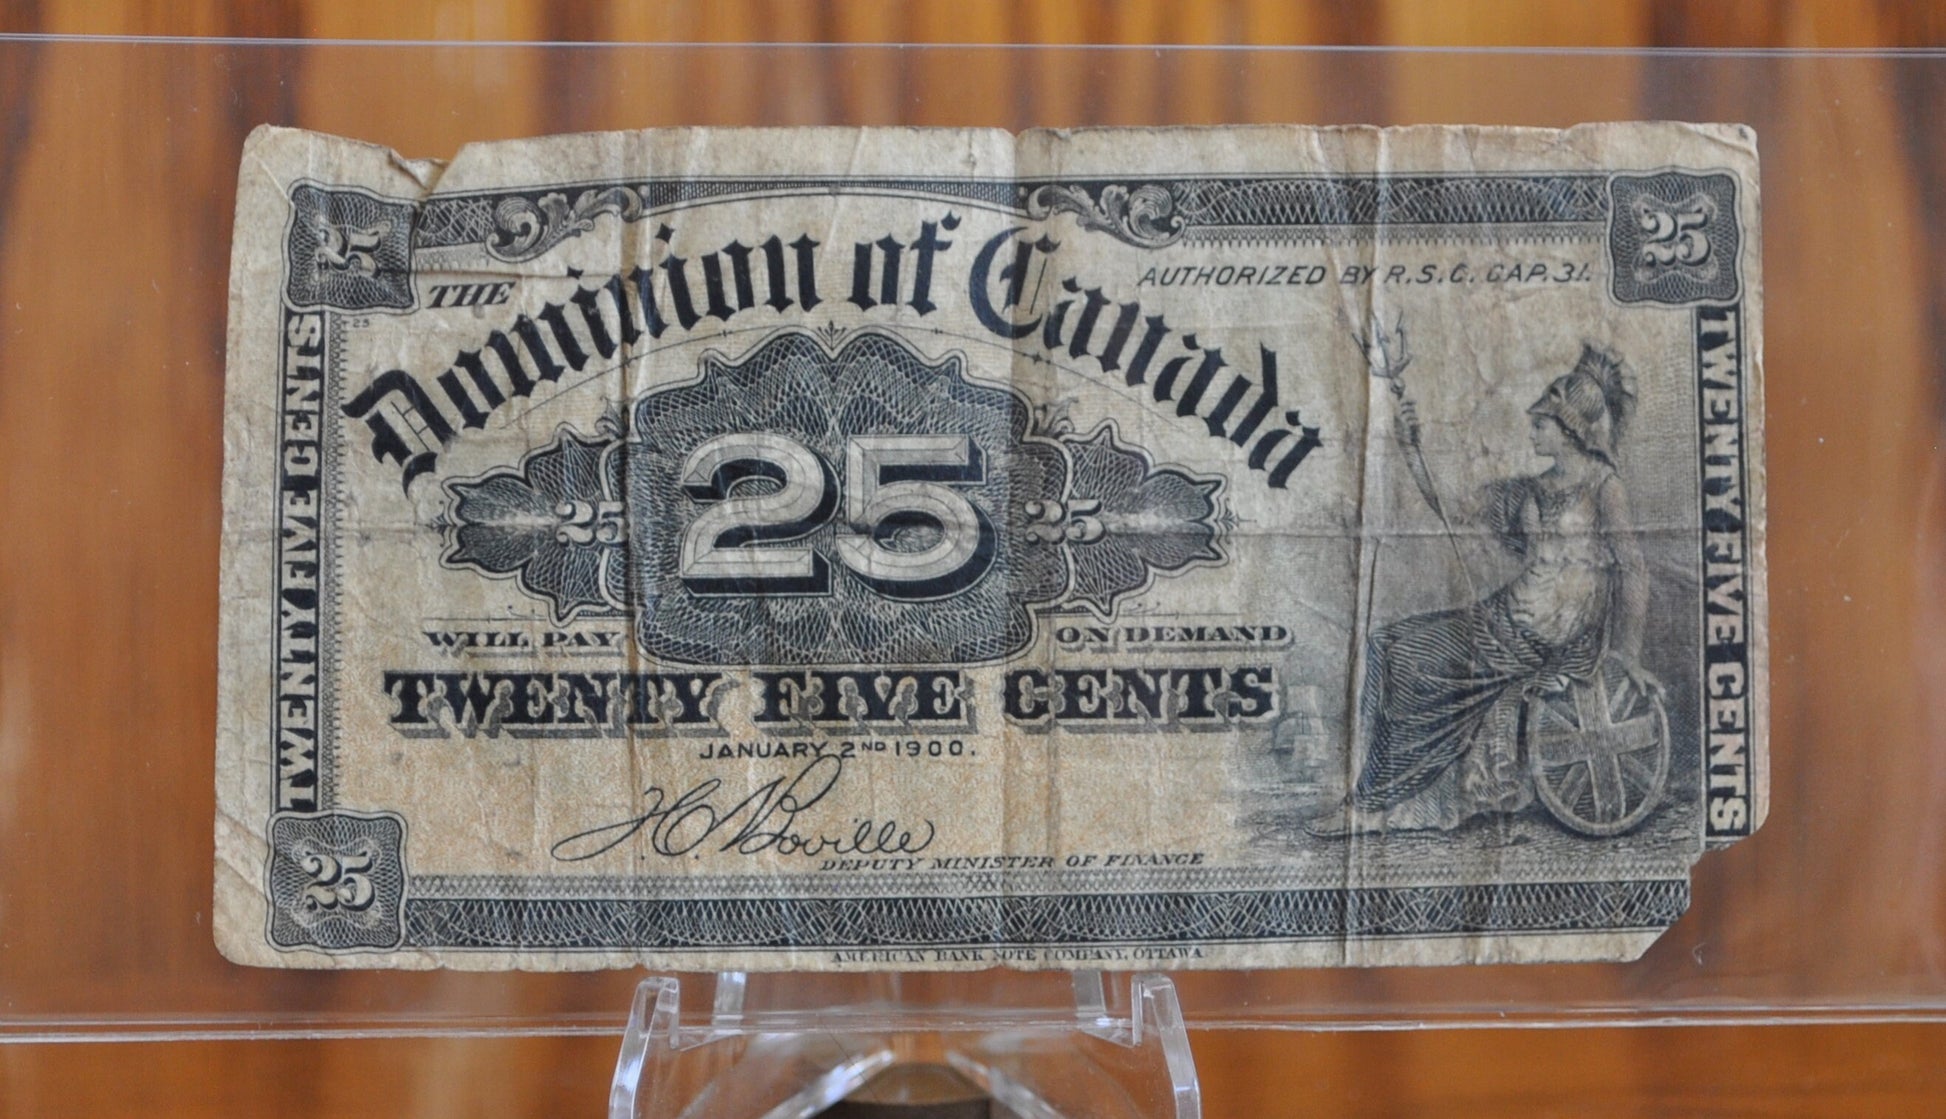 1900 25 Cent Fractional Note Dominion of Canada - 1900 Canadian Fractional Currency Twenty Five Cents - Great Design